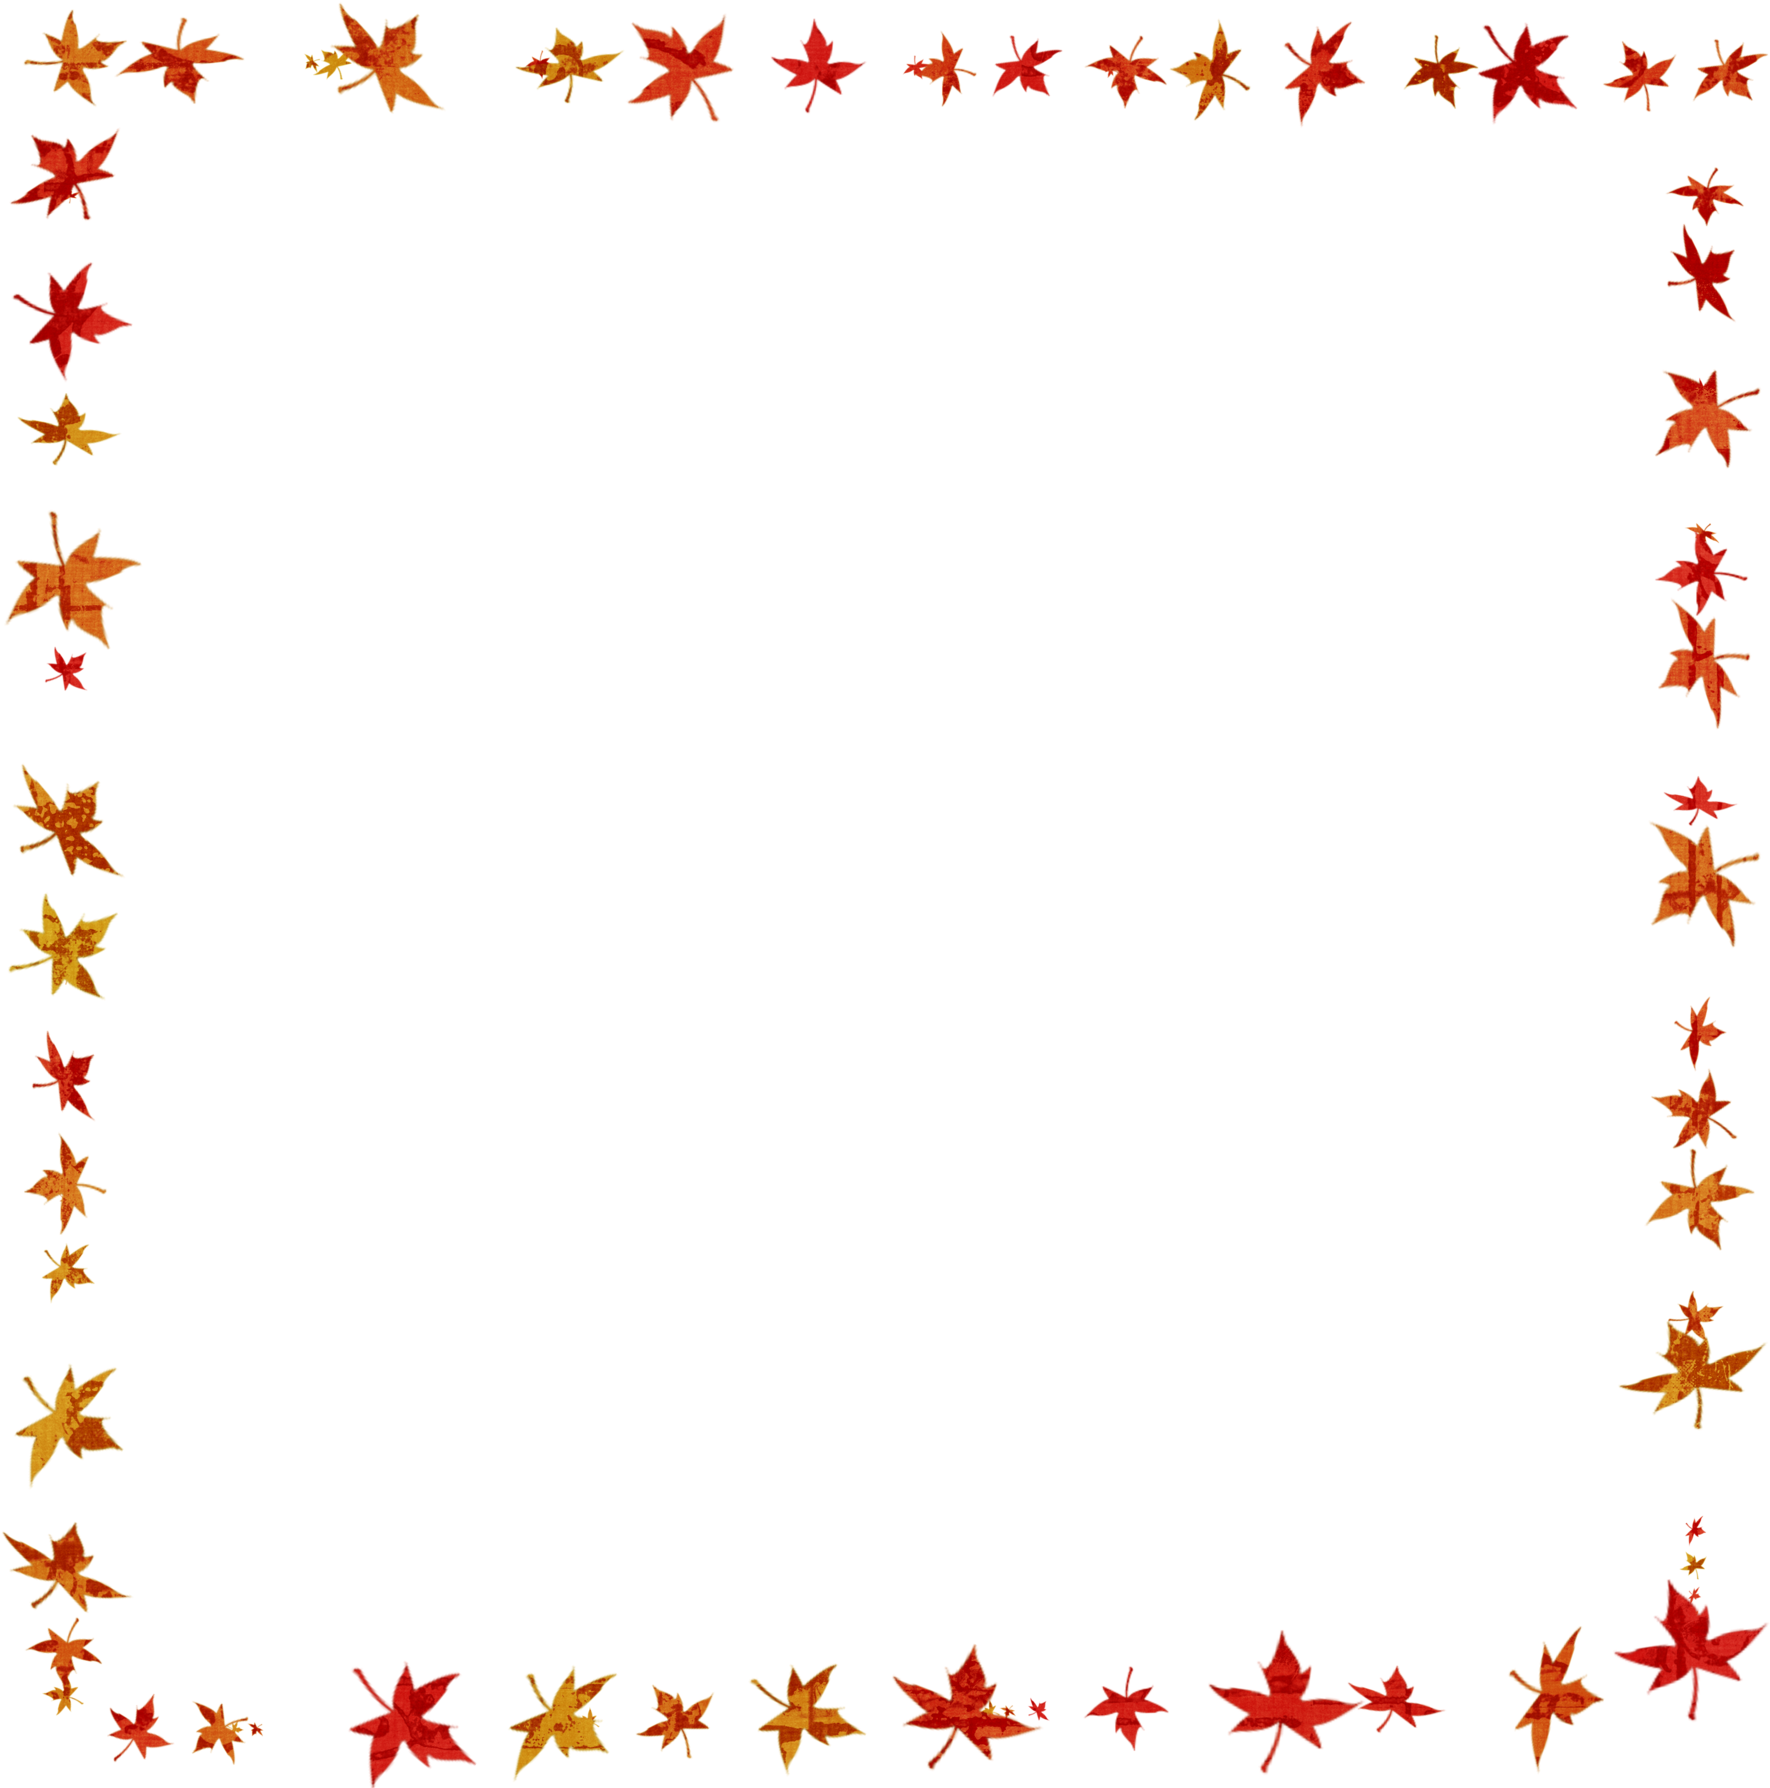 Fall Leaves Border Png Download - Portable Network Graphics (1800x1800)